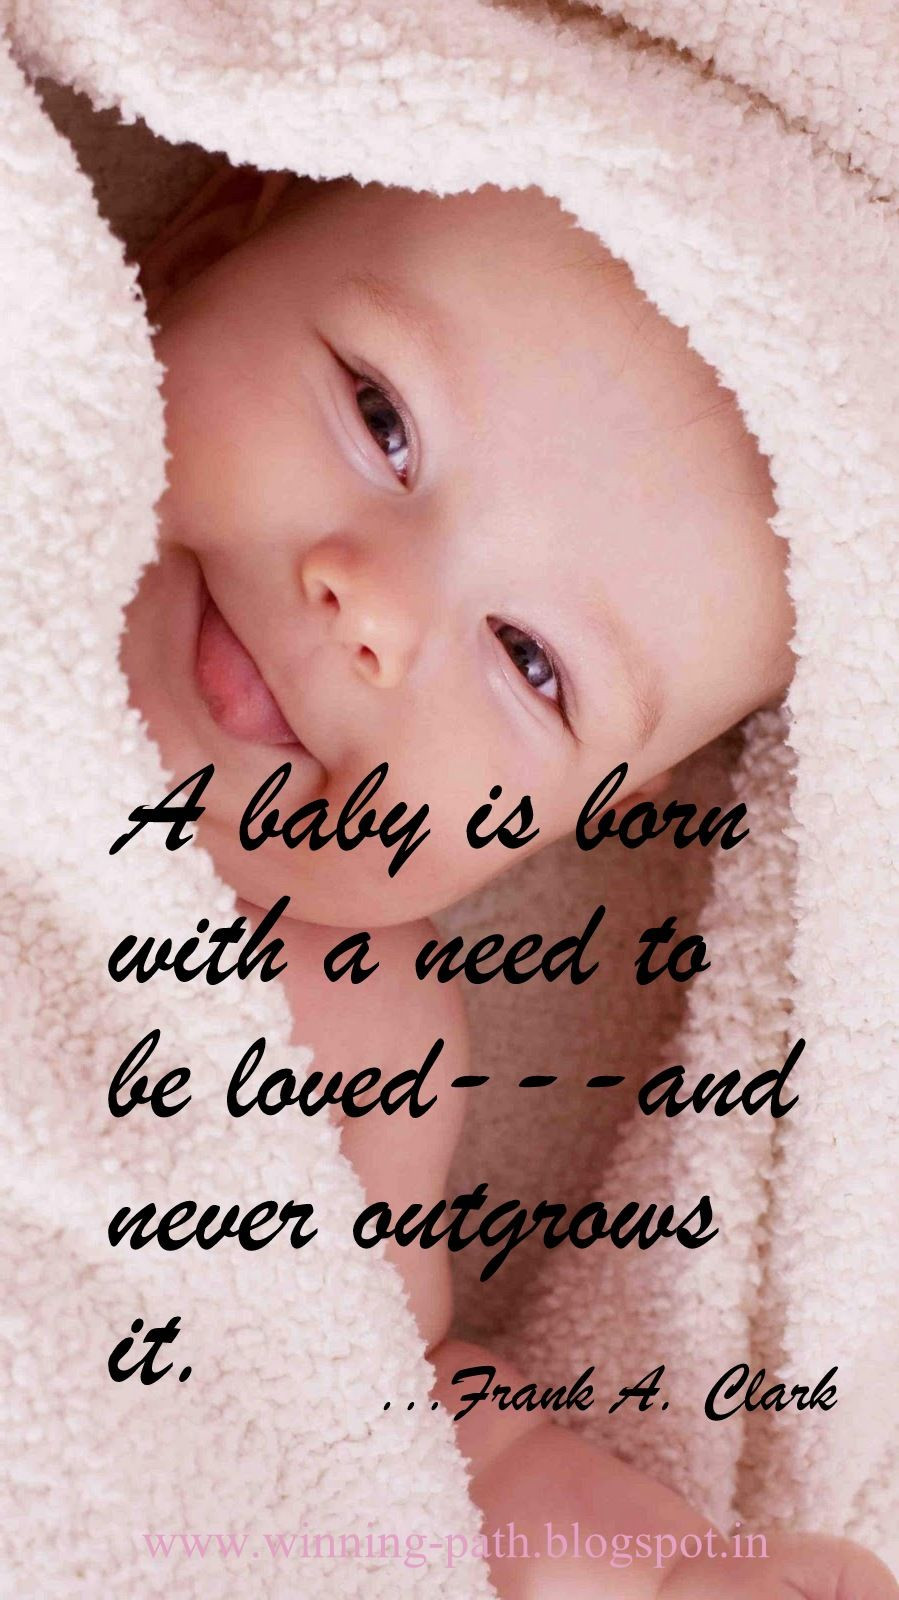 Baby Born Quotes
 A baby is born with a need to be loved and never